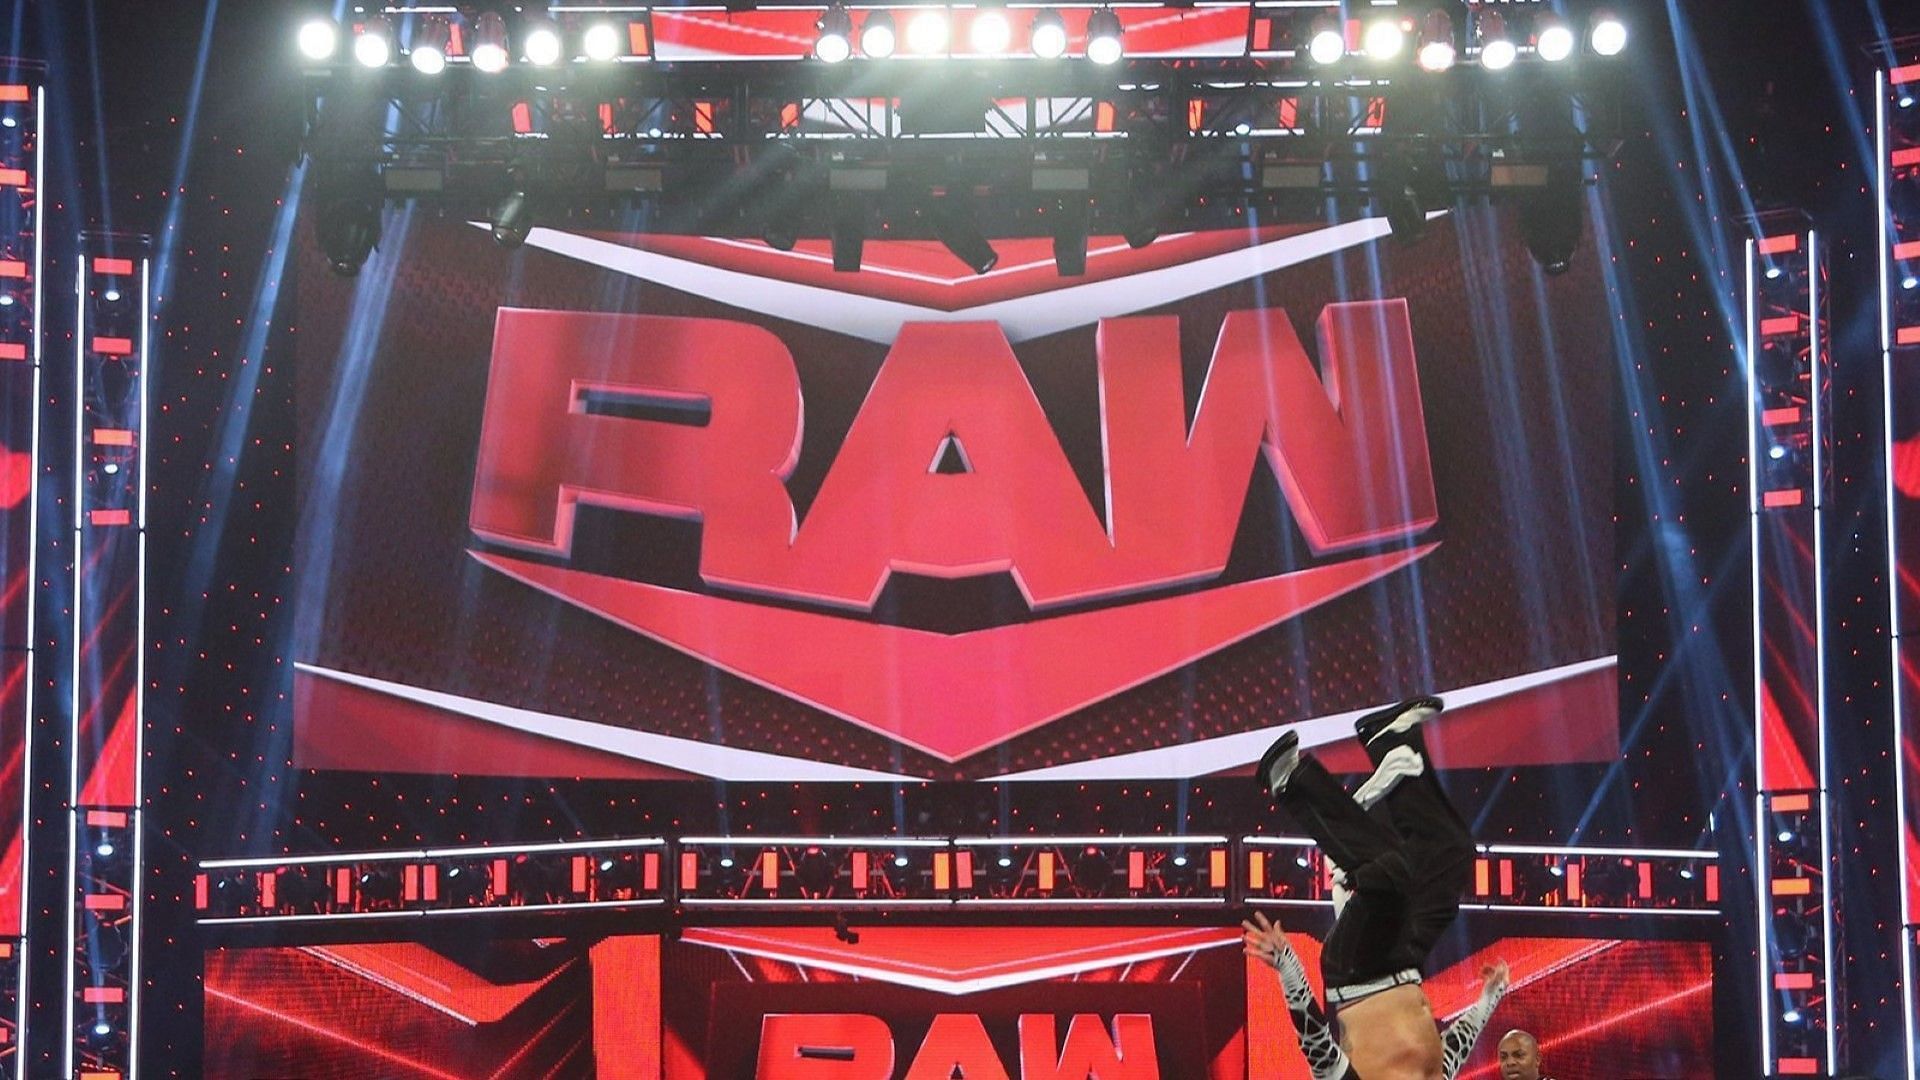 The WWE RAW logo on display via the stage inside of a packed arena